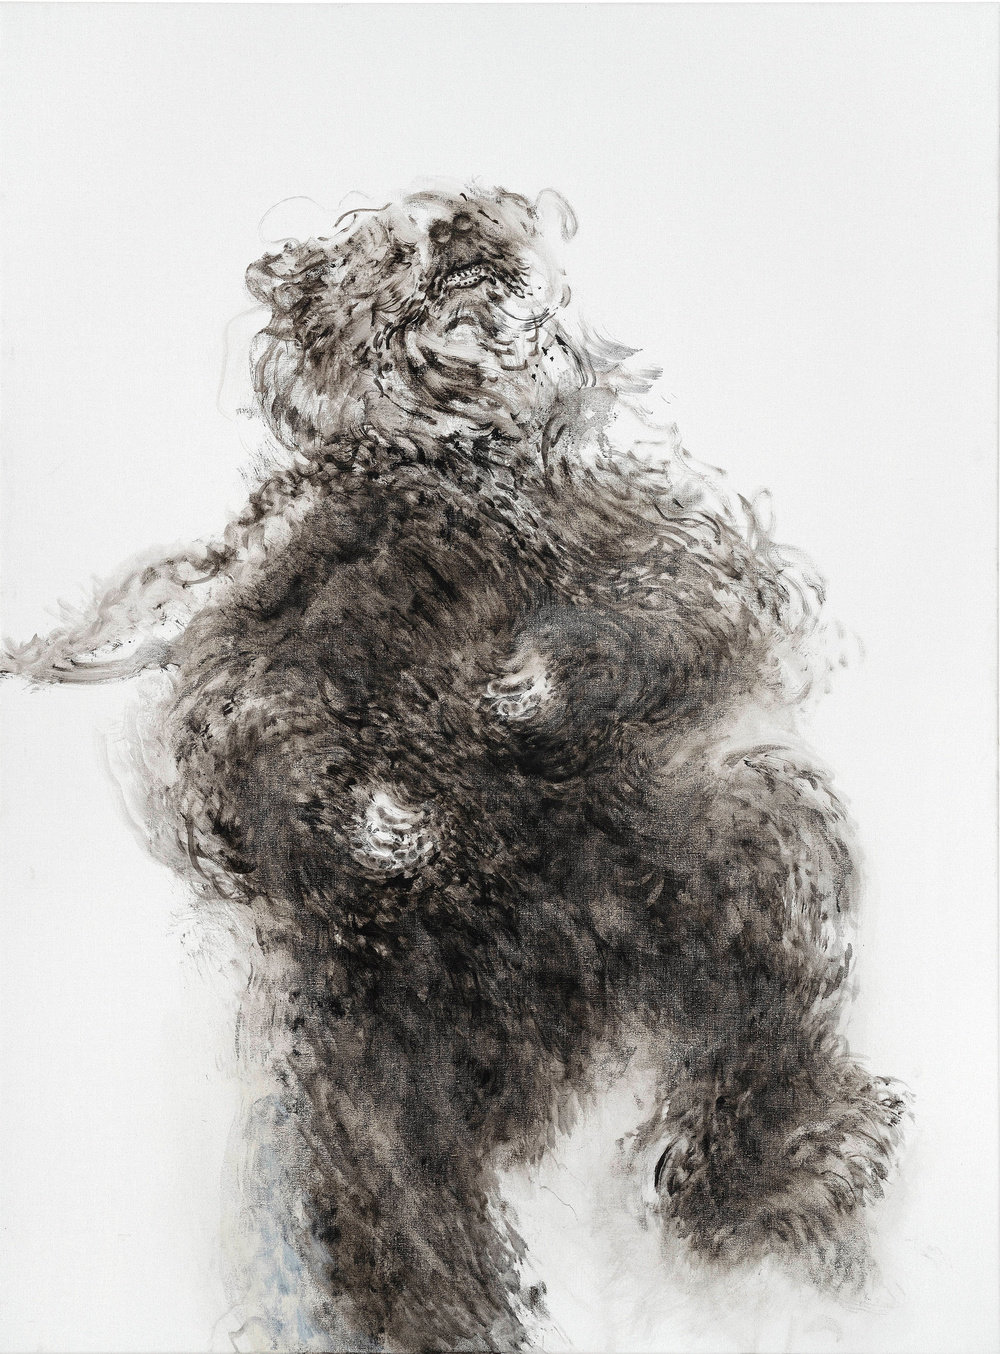 Maggi Hambling, Young Dancing Bear, 2019, oil on canvas. Depicted is a young dancing bear, center to the canvas, animated in movement, gazing up into empty white space above.